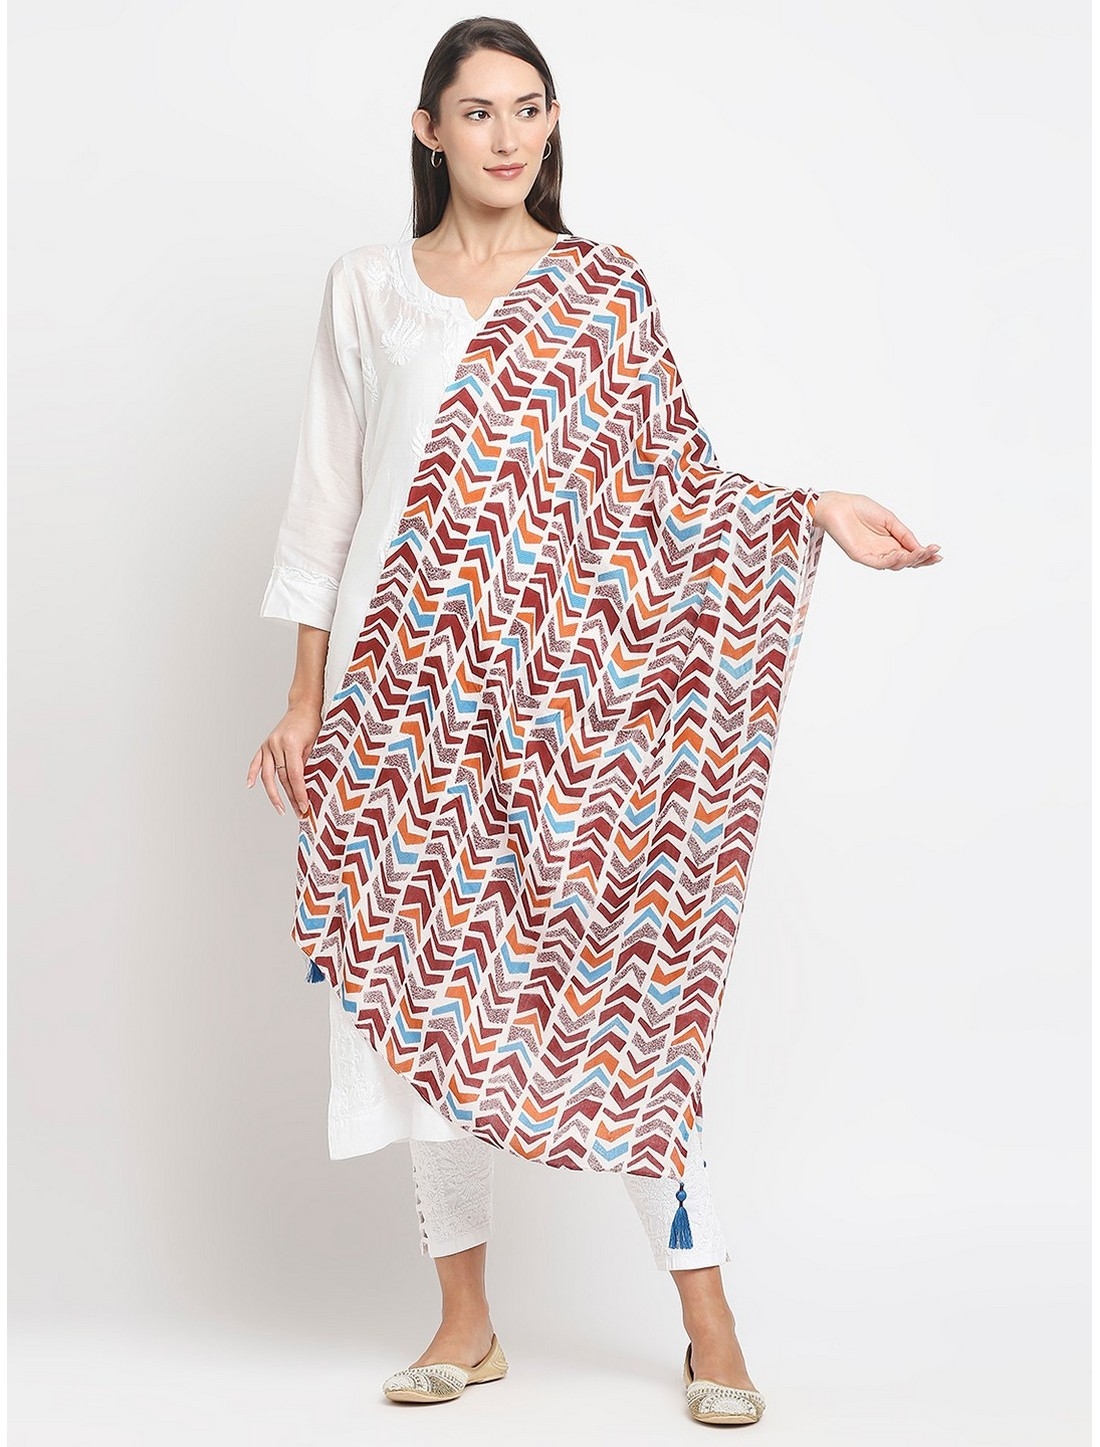 Get Wrapped | Get Wrapped Multi  Printed Scarves with Tassels for Women